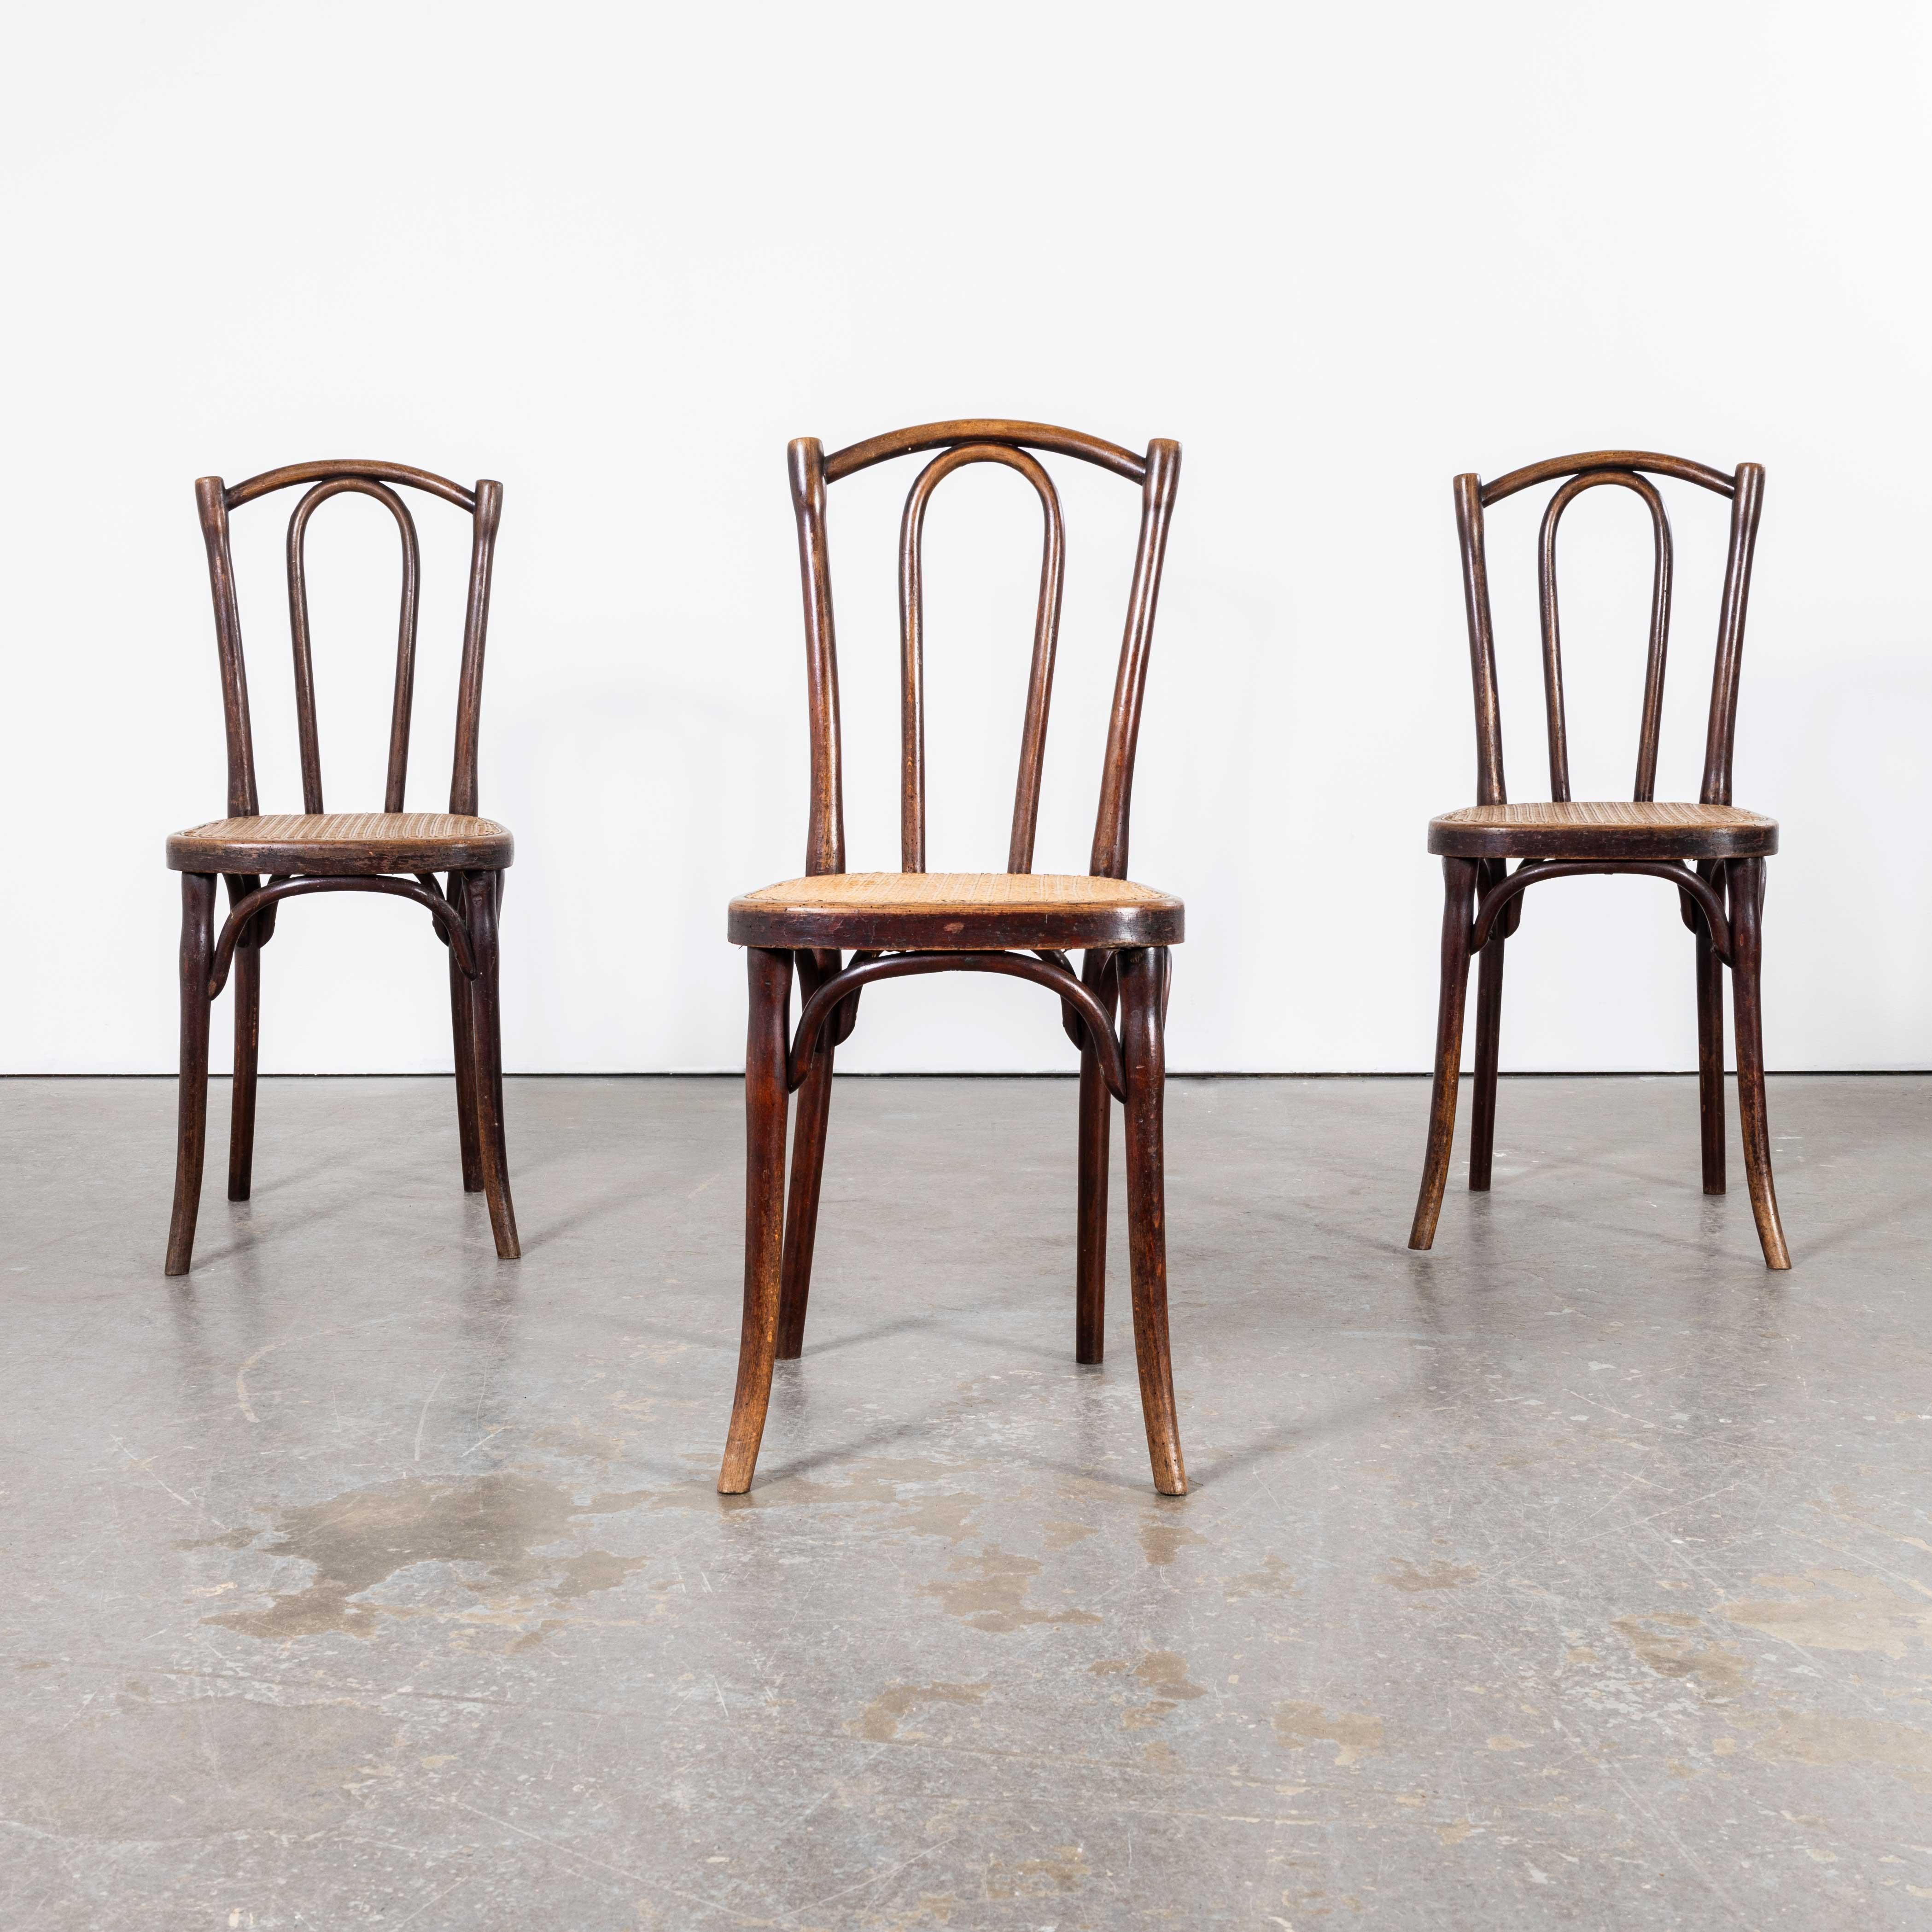 1920’s Thonet Original Cane Seated Dining Chairs – Set of Three For Sale 5